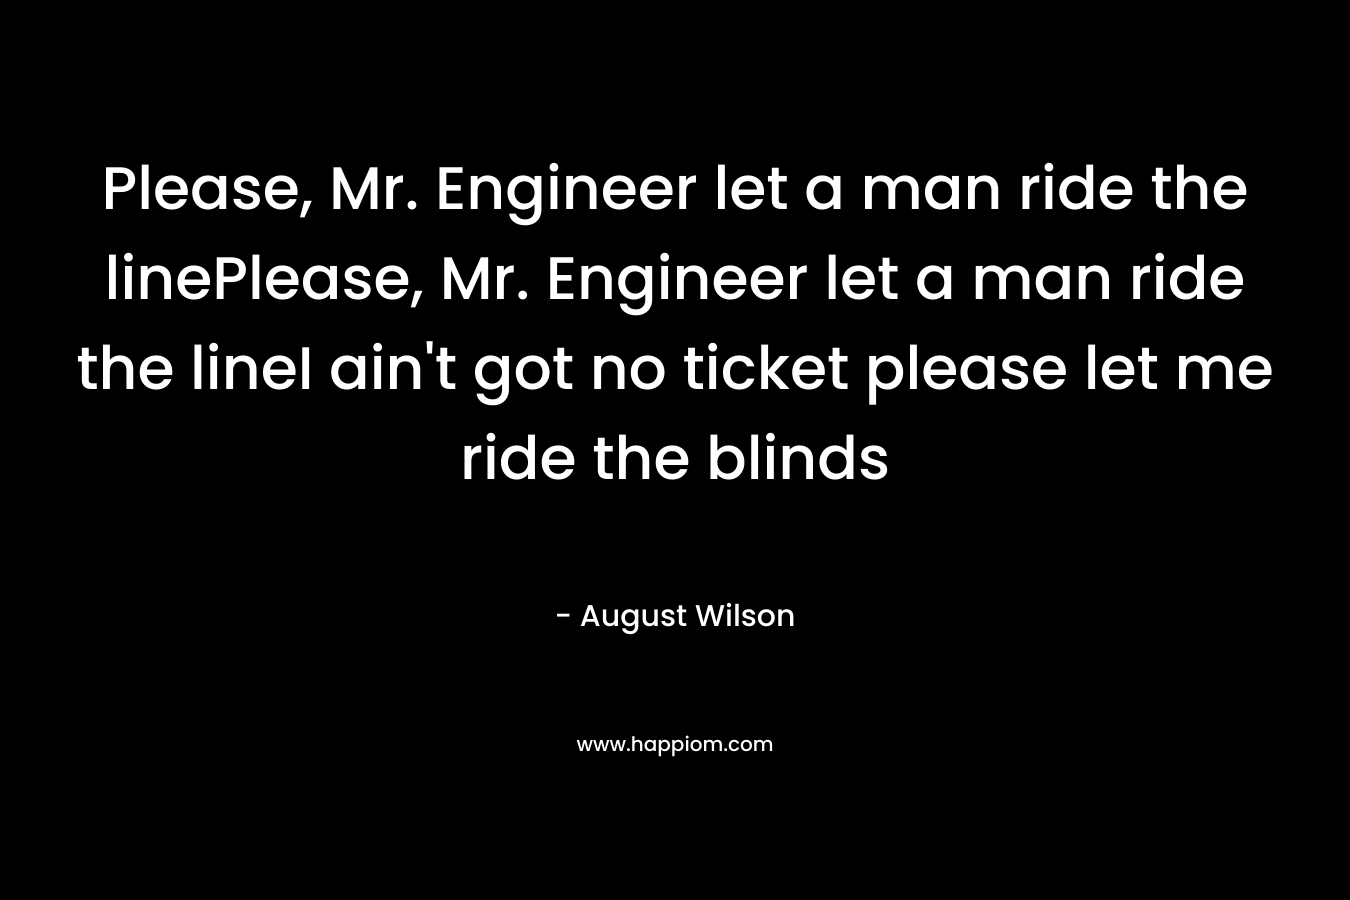 Please, Mr. Engineer let a man ride the linePlease, Mr. Engineer let a man ride the lineI ain’t got no ticket please let me ride the blinds – August Wilson